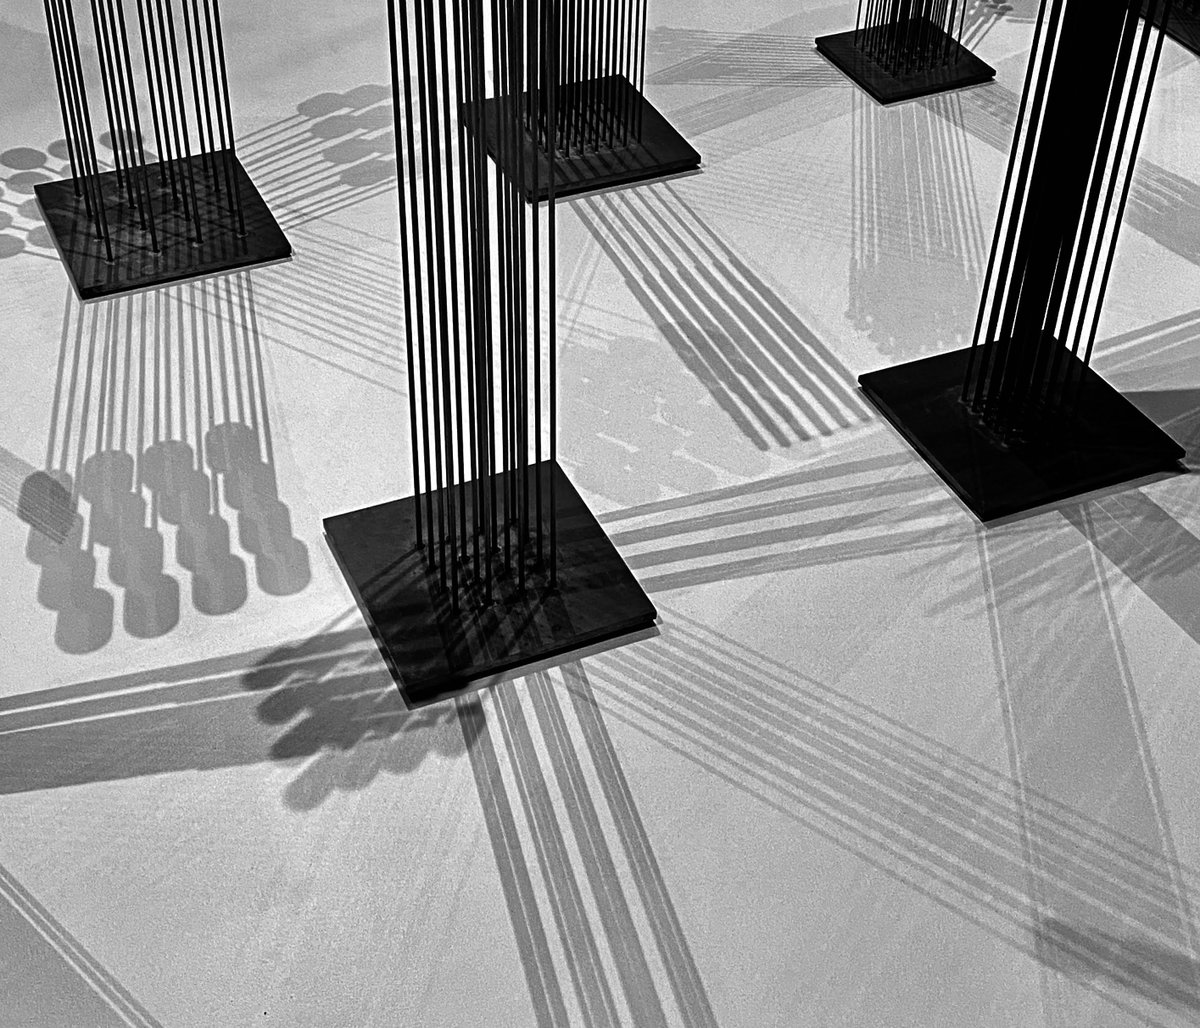 Shadows created beautiful visuals in this
shot of tonals at the Nasher in 2021. Look at those
incredible radiating lines!

#harrybertoia #harrybertoiafoundation #scuplture
#soundingsculpture #tonalsculpture #nasher
#metalwork #shadows #photography #exhibit